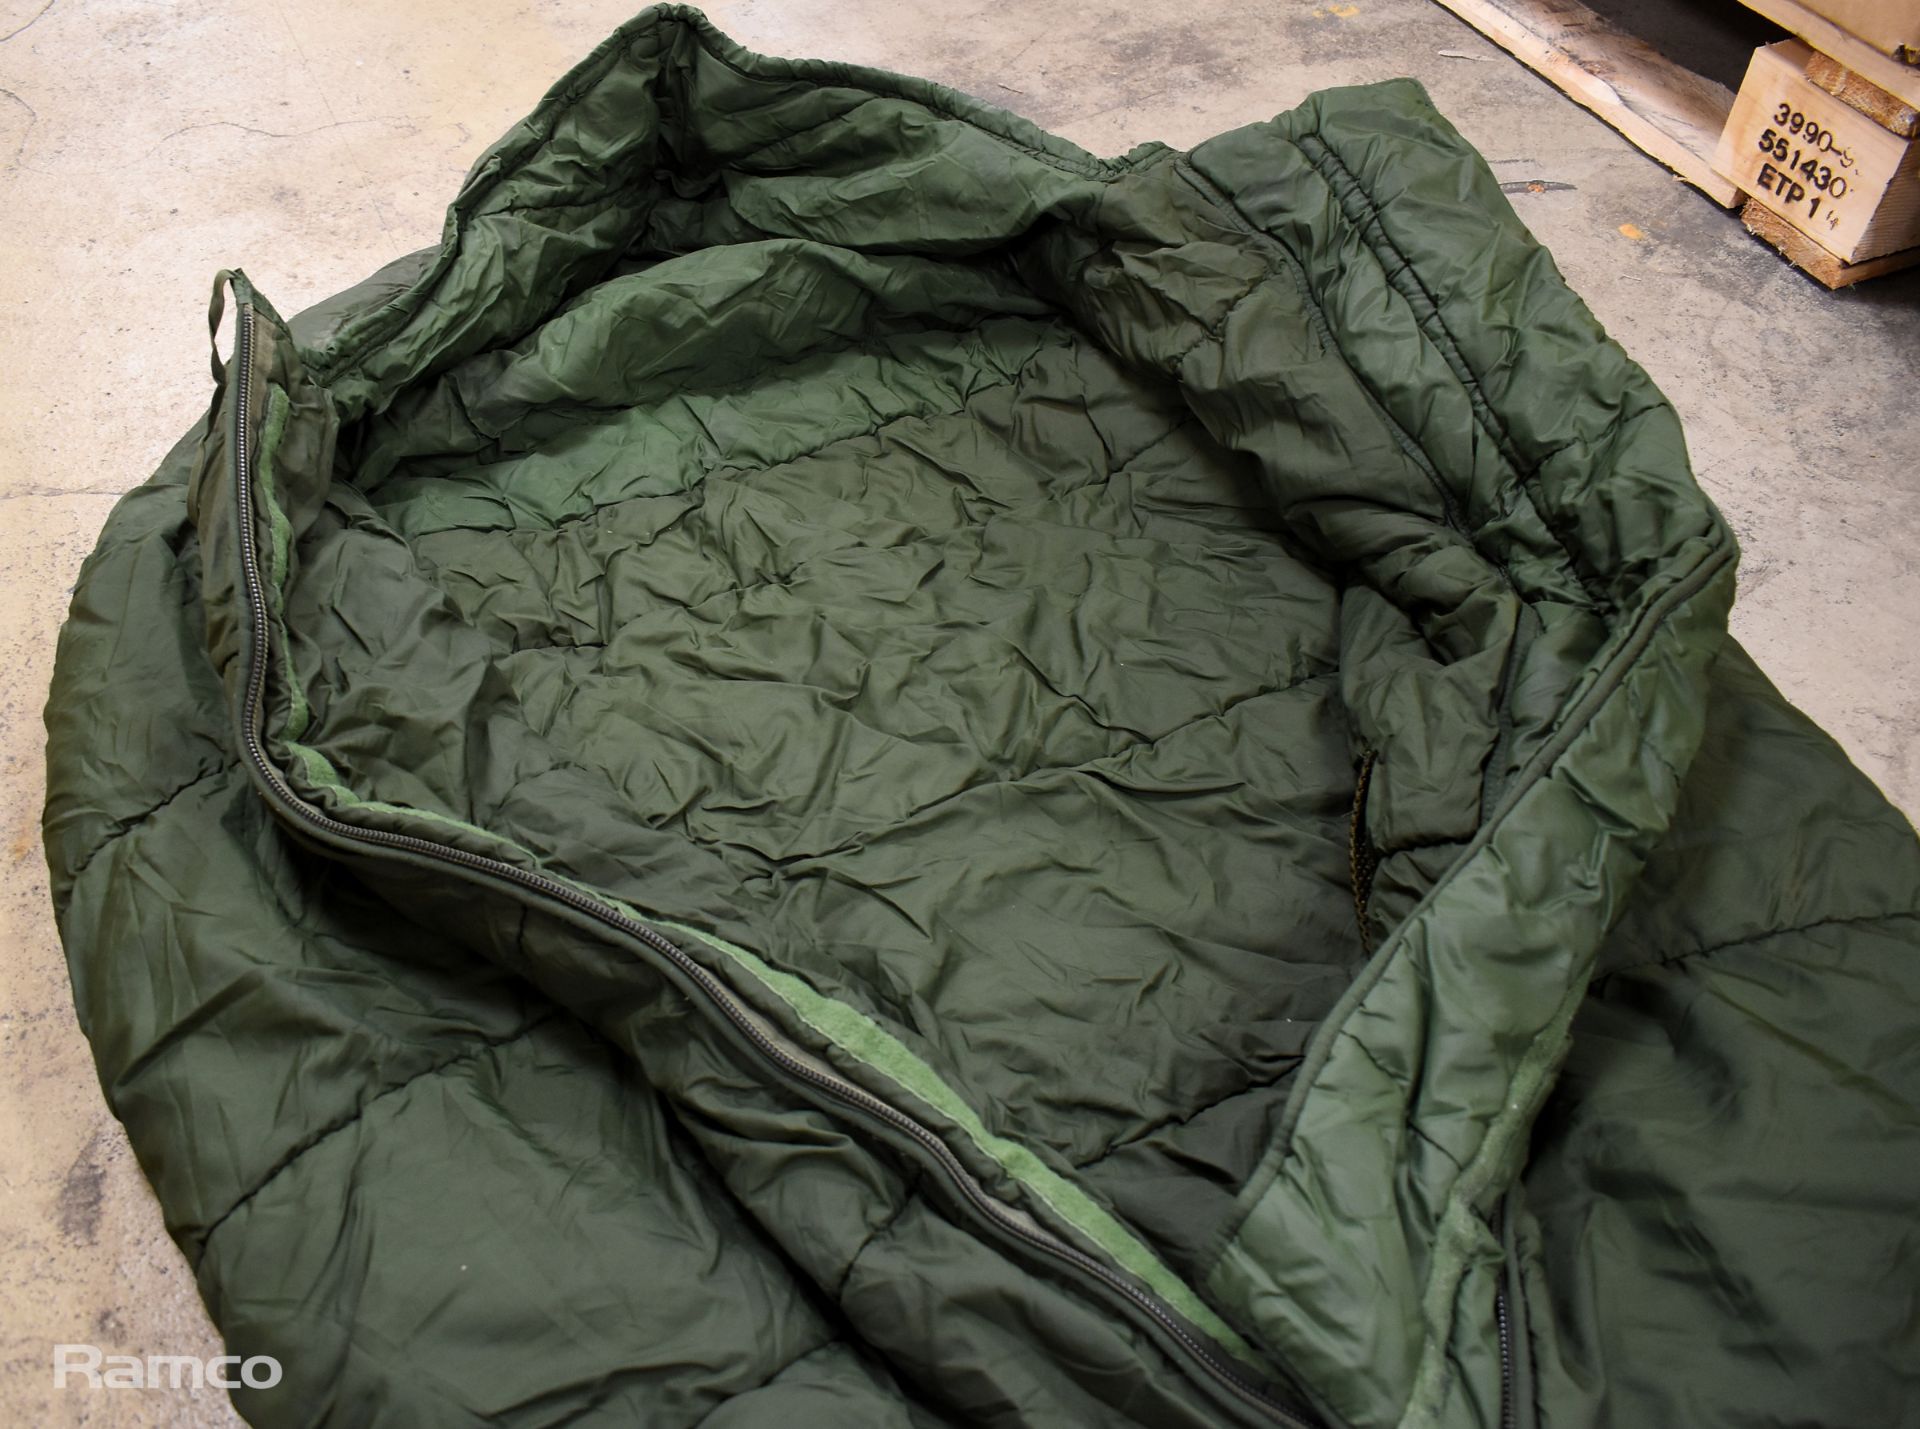 30x Sleeping bags - mixed grades and sizes - Image 7 of 8